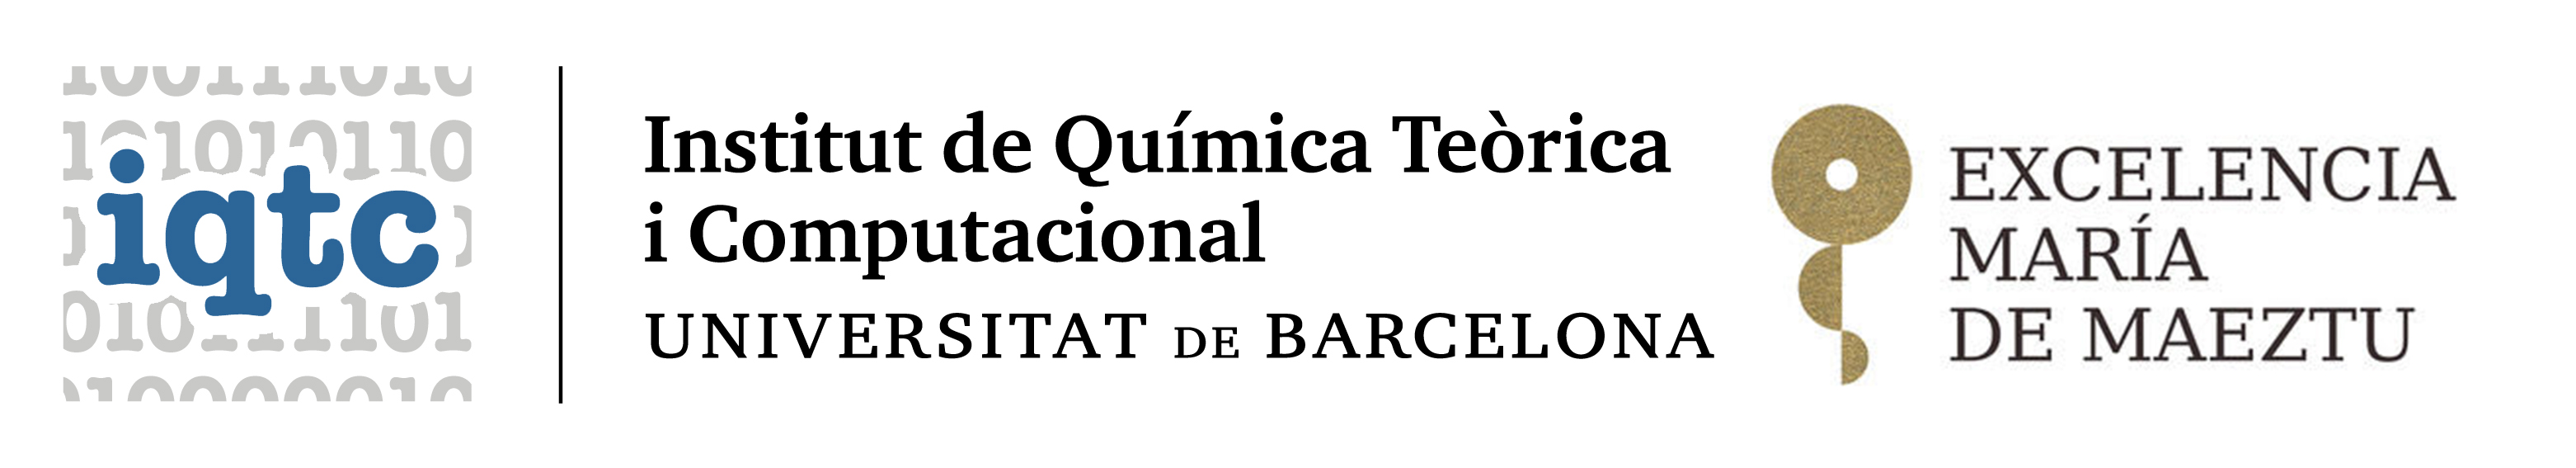 IQTC – The Institute of Theoretical and Computational Chemistry of the Universitat de Barcelona